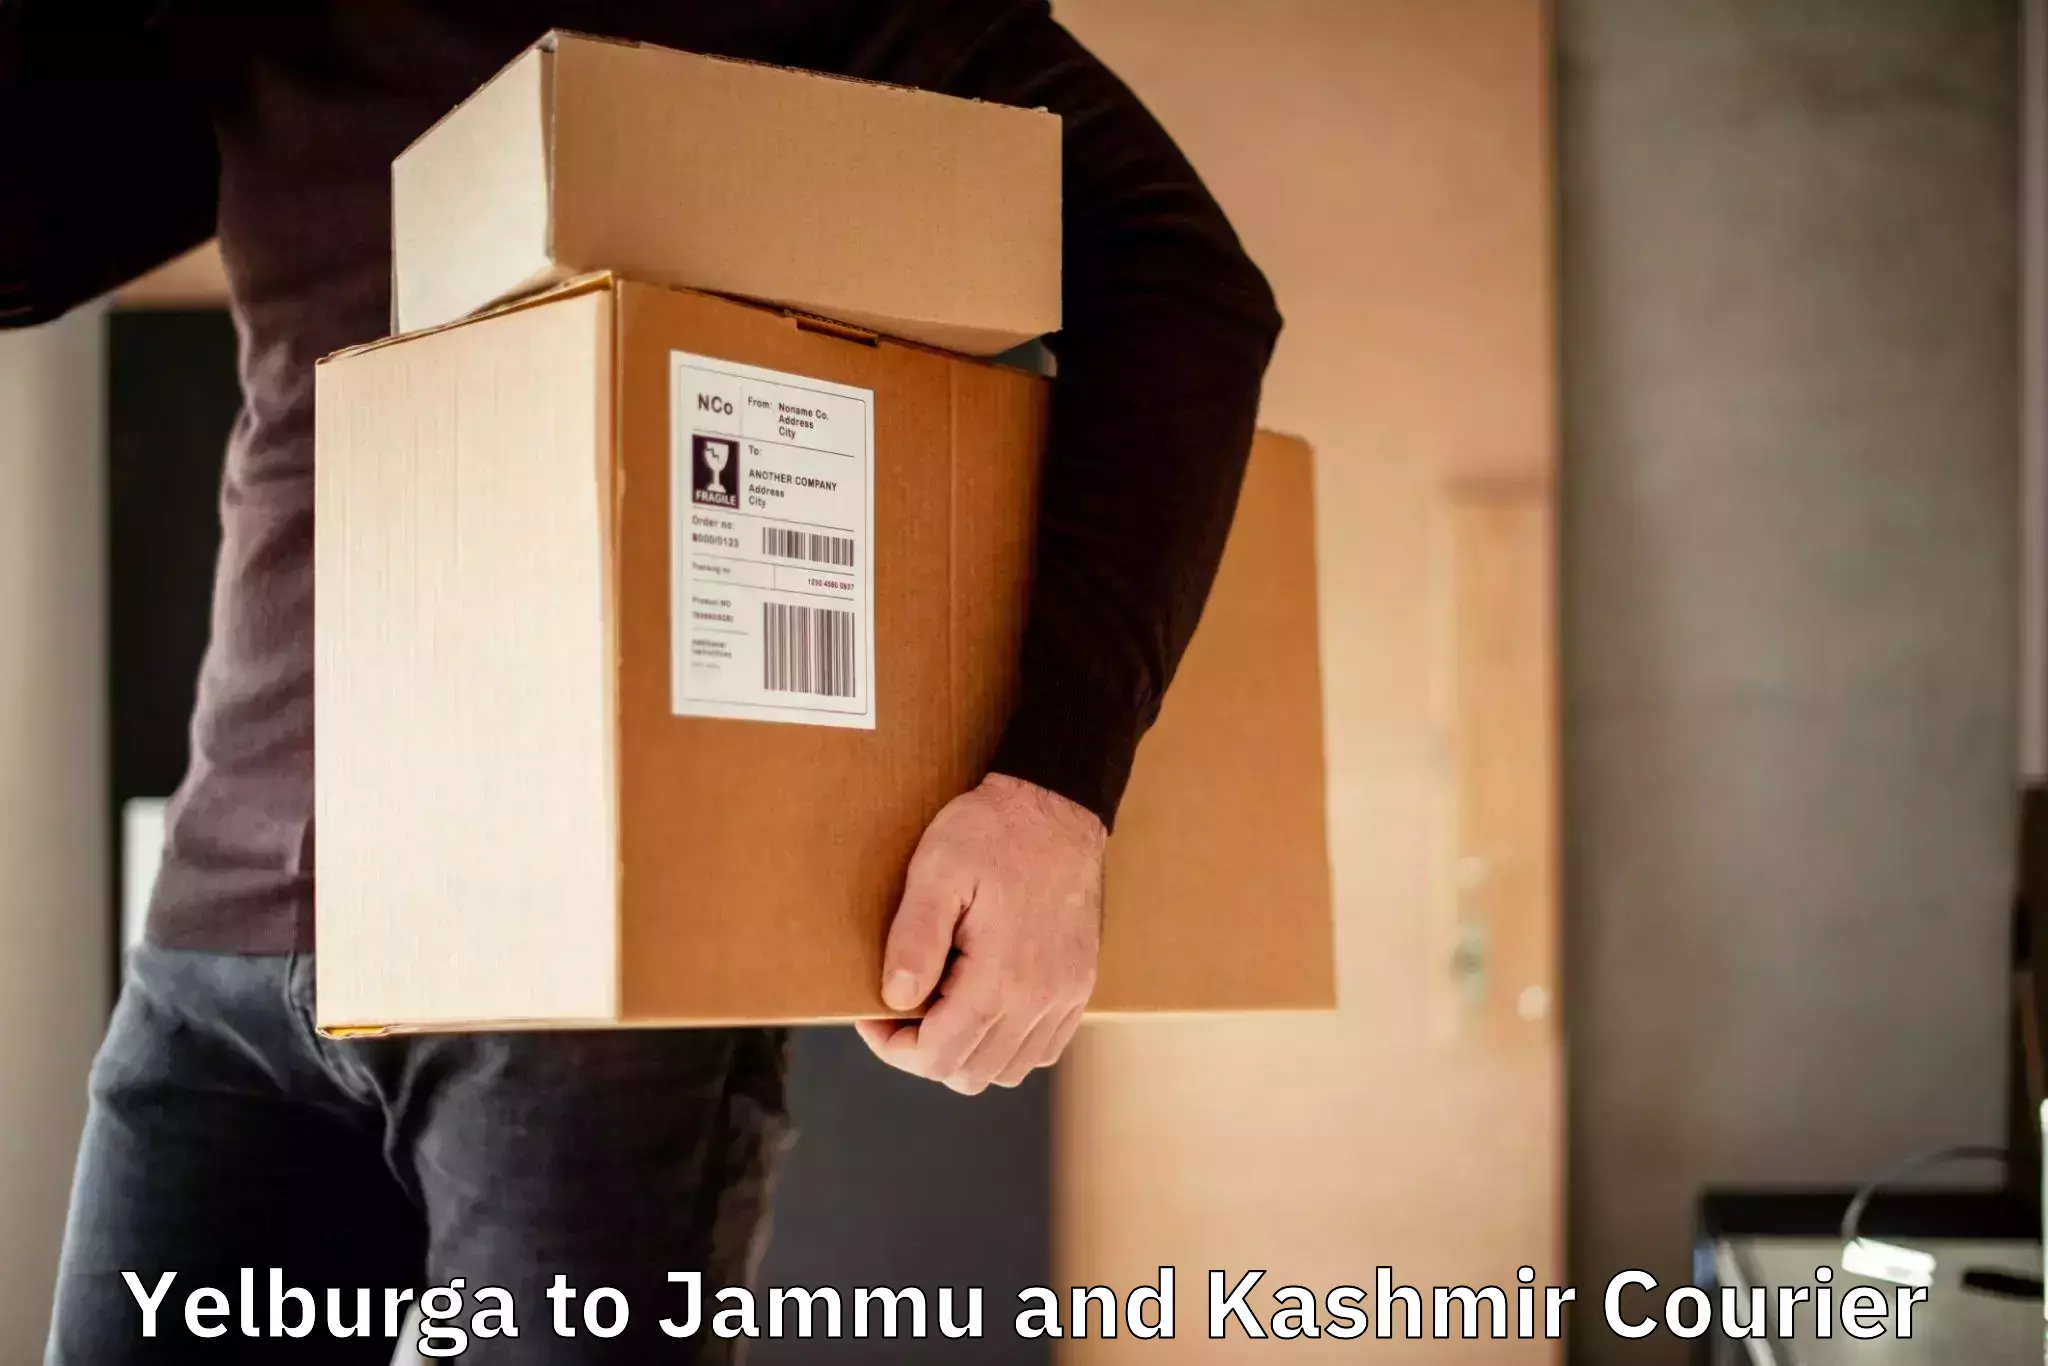 Global shipping networks Yelburga to Poonch